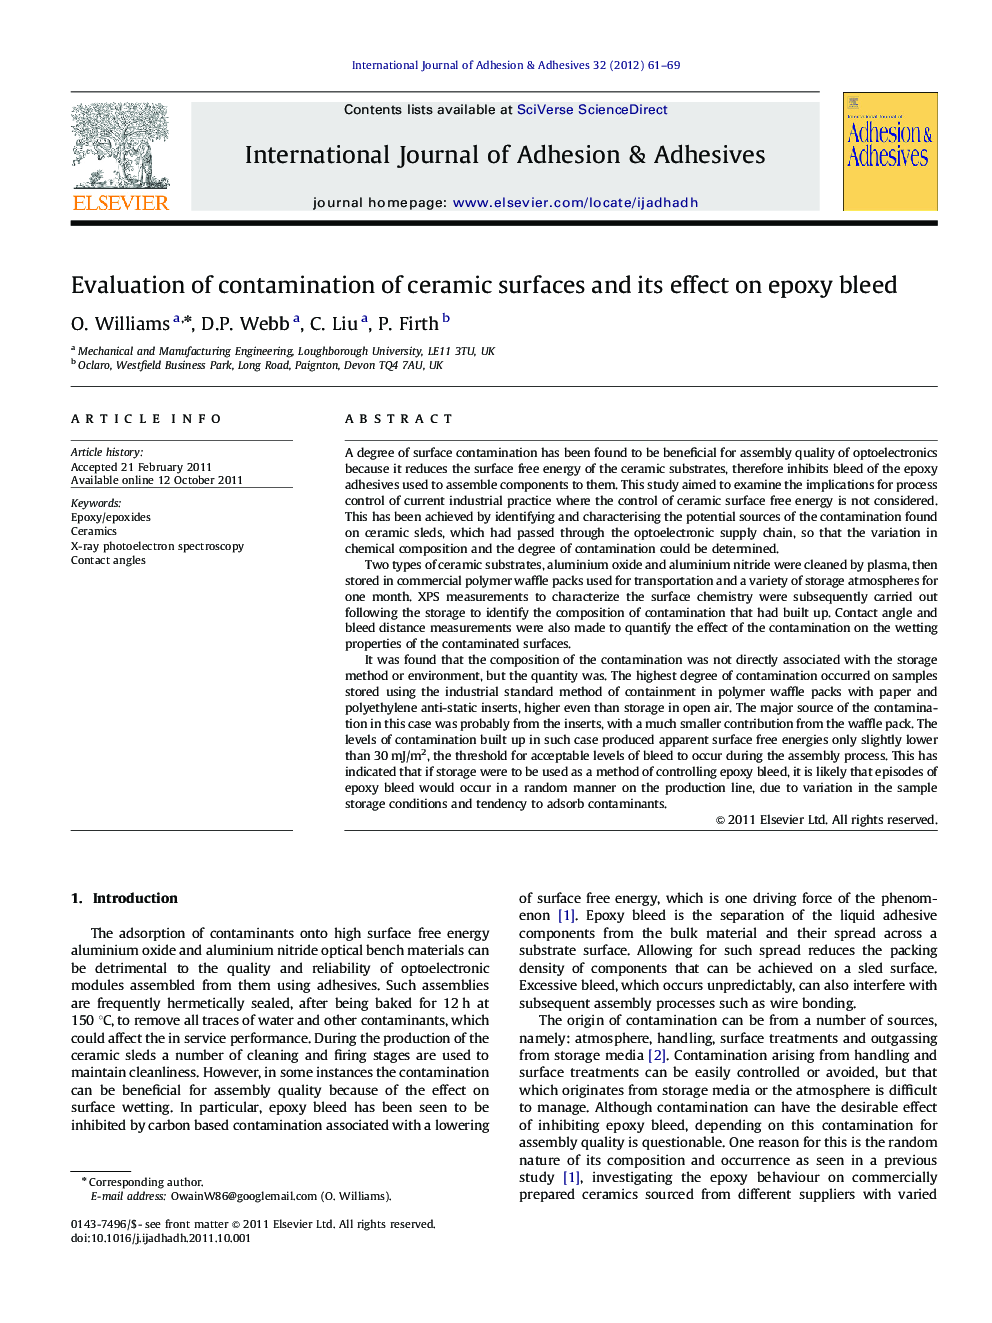 Evaluation of contamination of ceramic surfaces and its effect on epoxy bleed